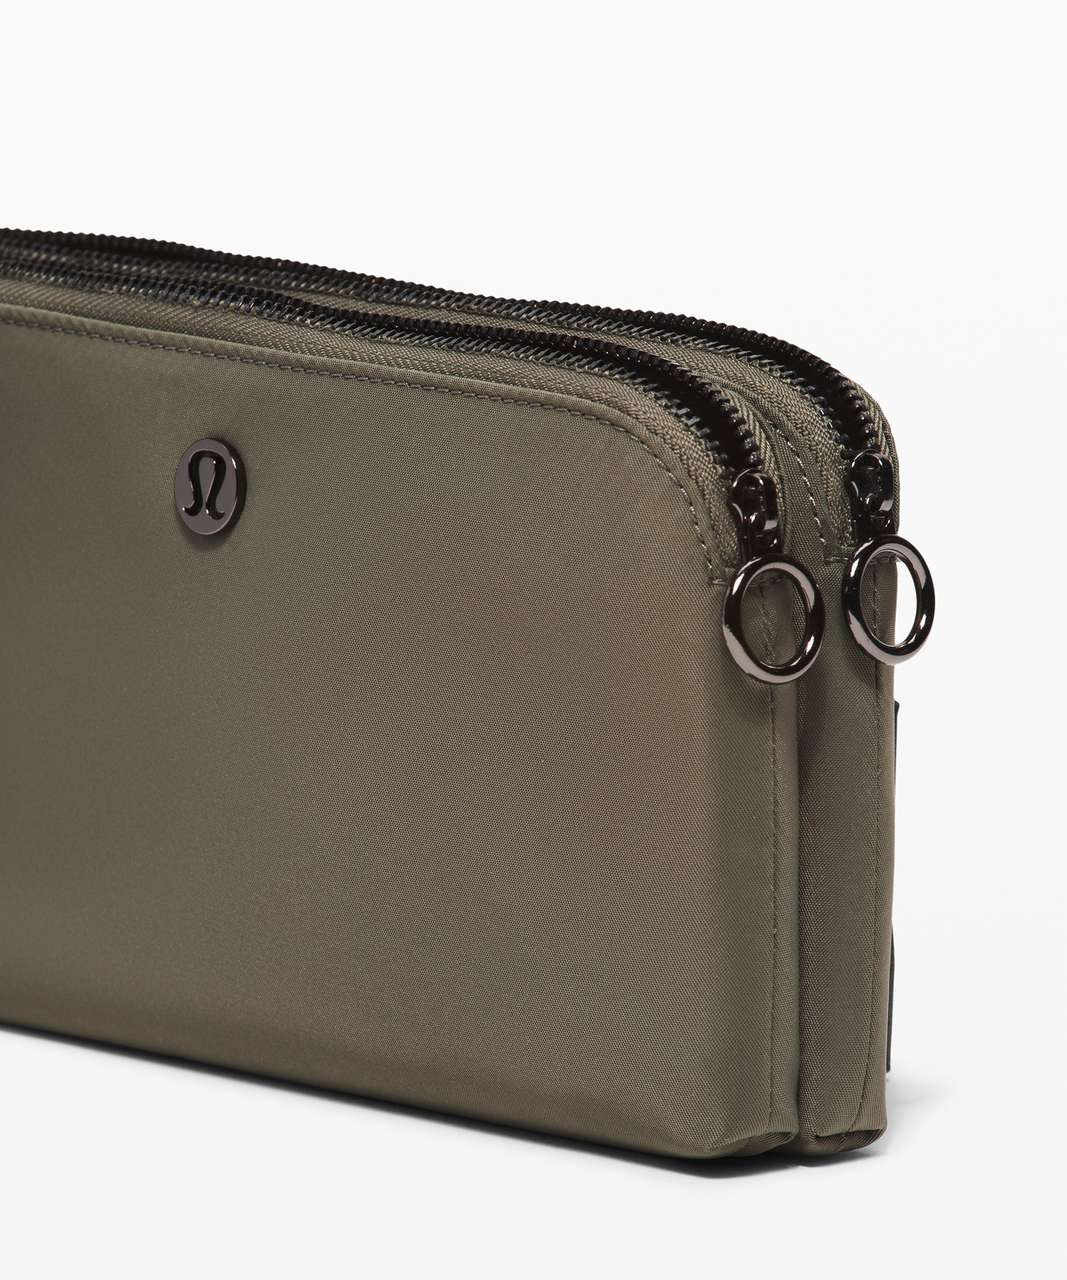 Lululemon Now and Always Pouch - Army Green